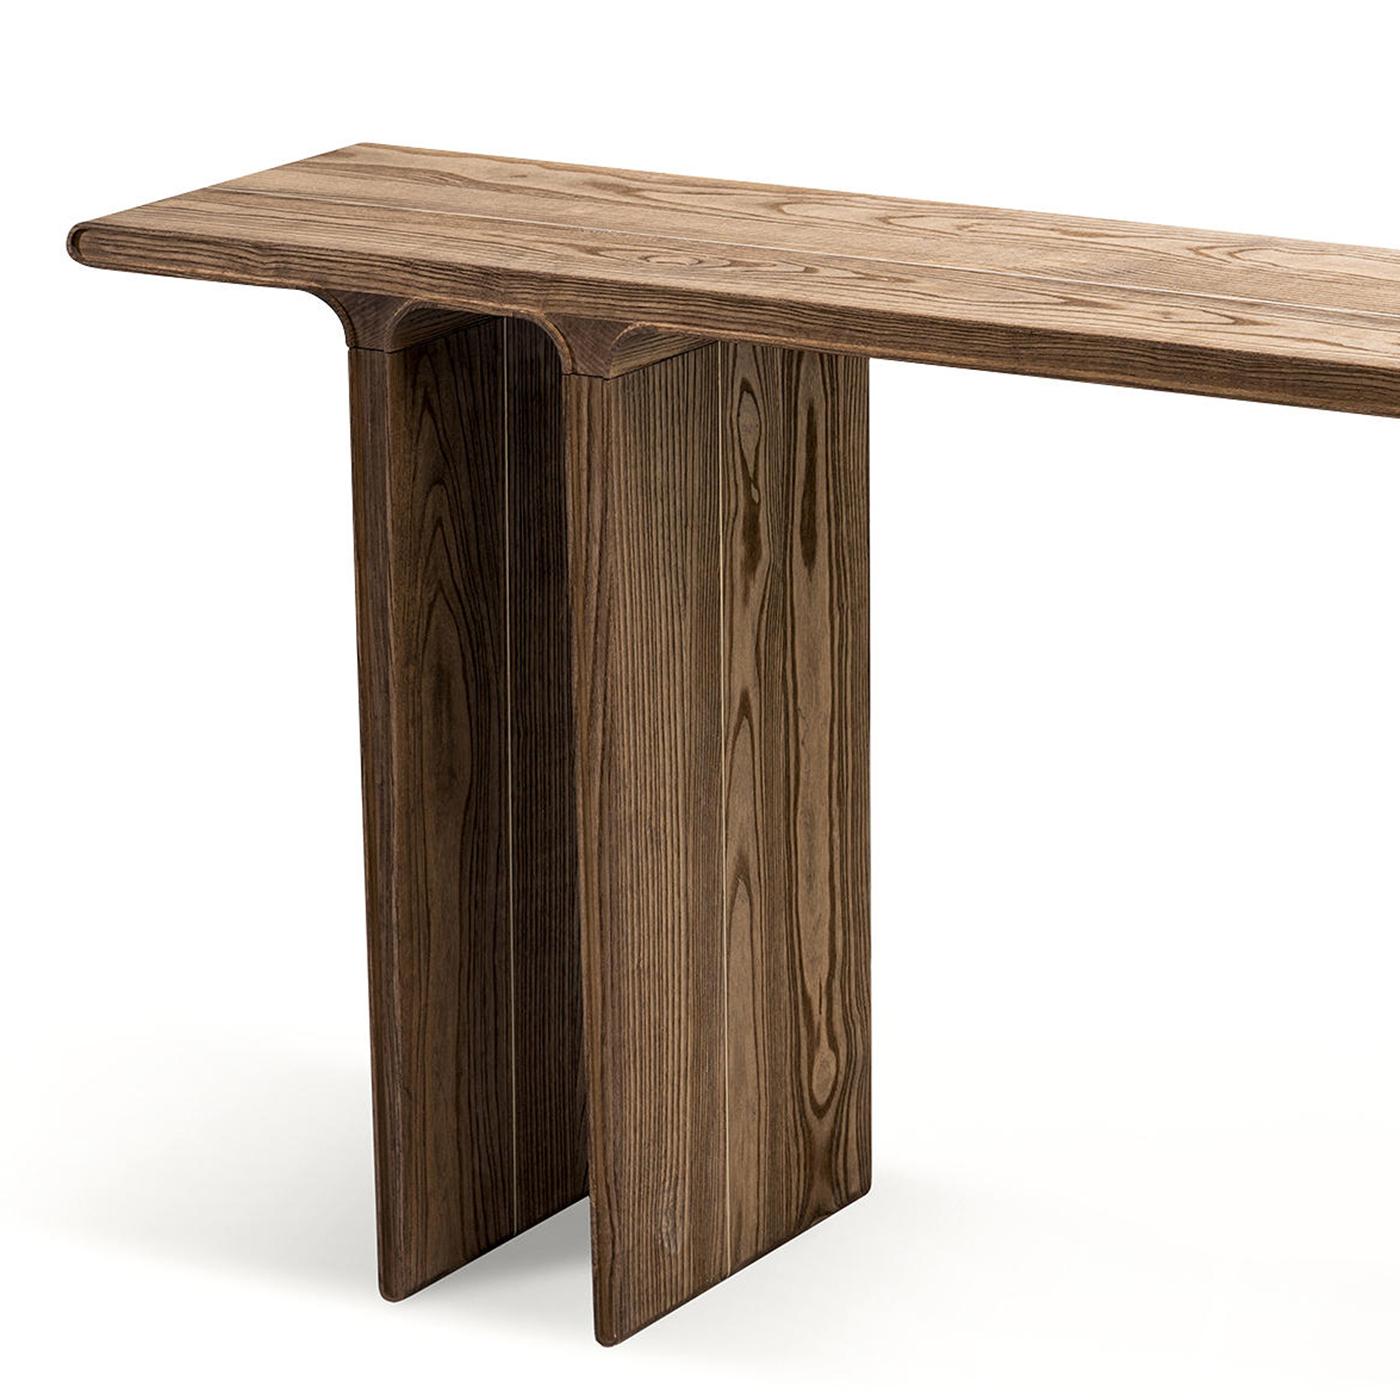 Console table weaver ash with all console 
structure in solid ash in walnut stained finish.